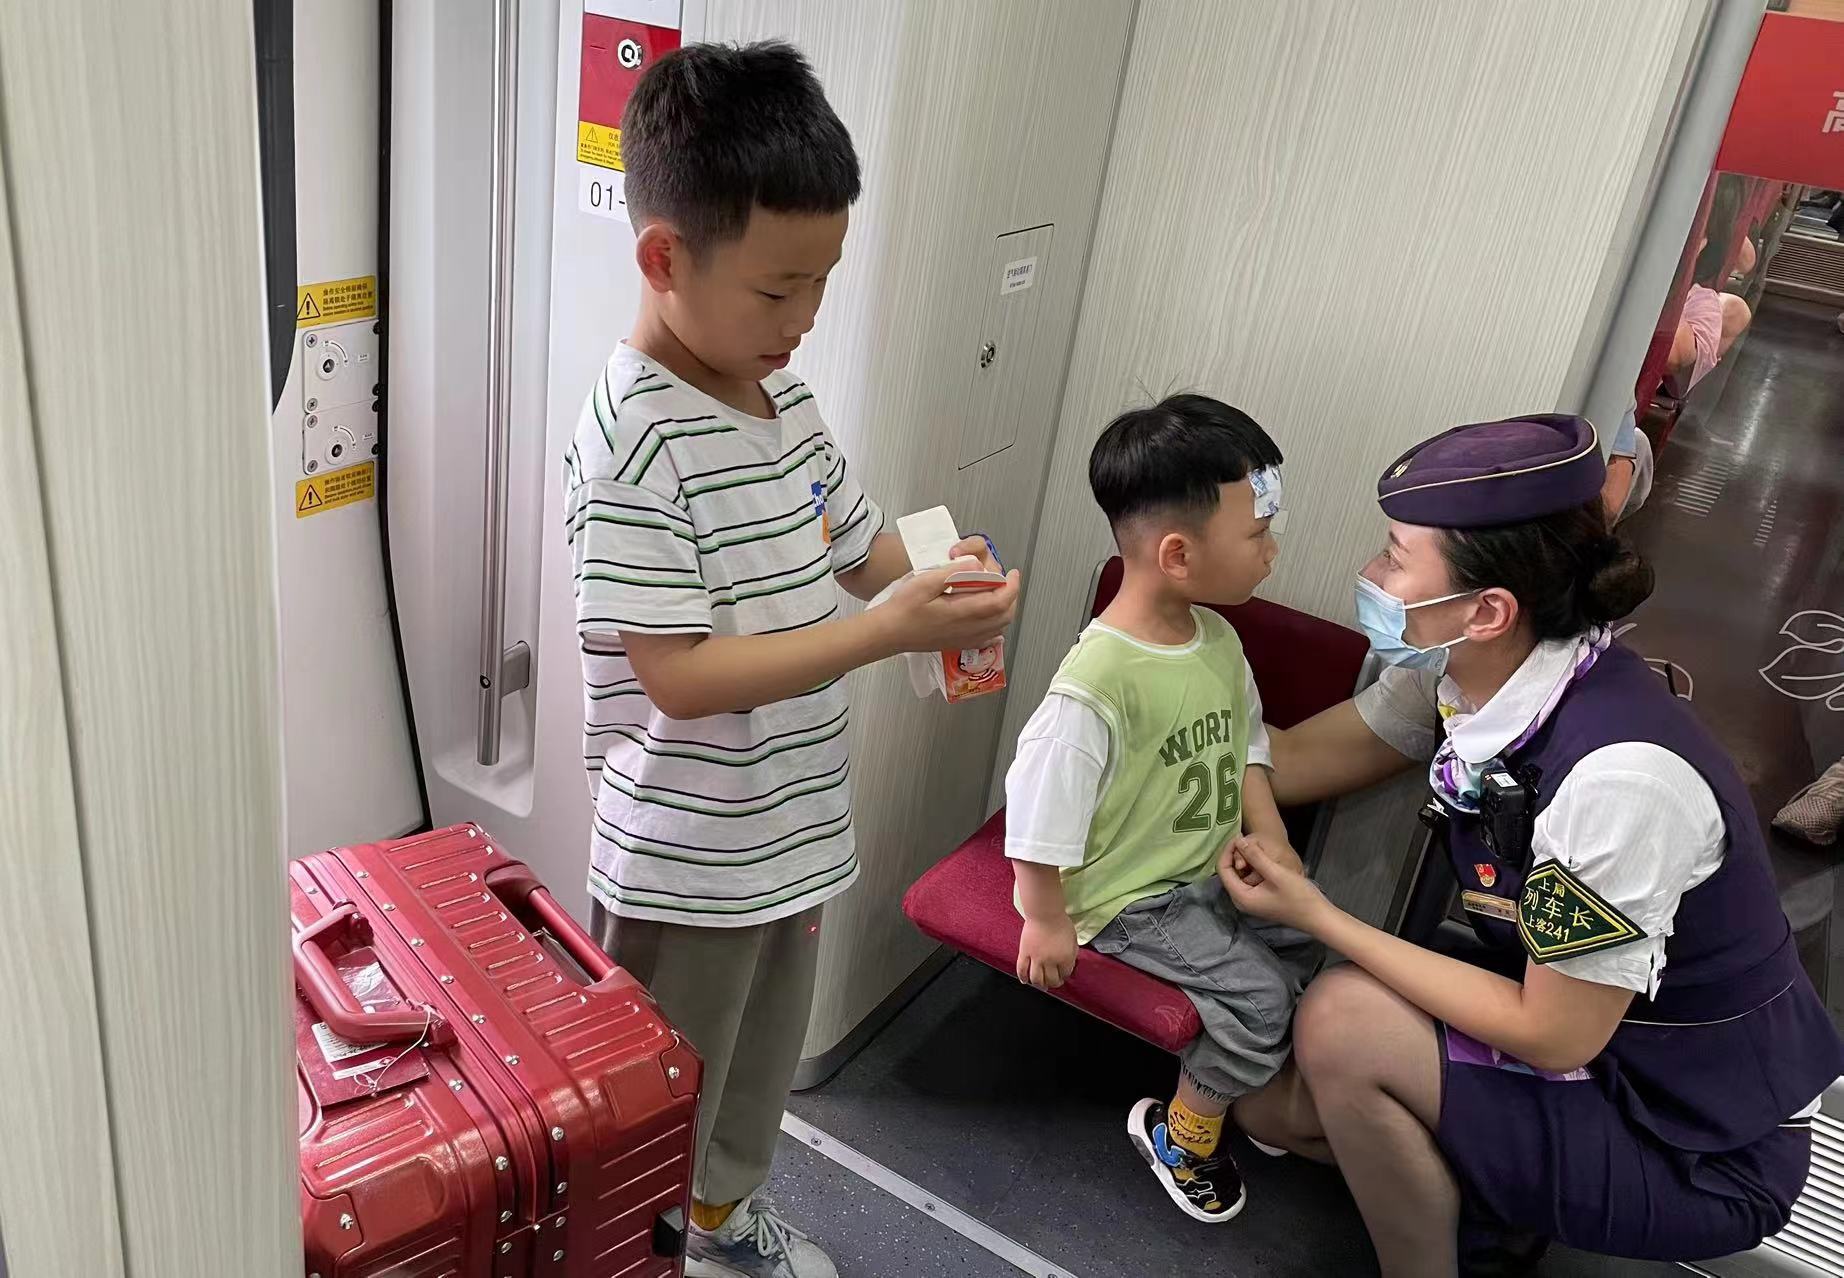 Facing the "bear child": This summer, high-speed train attendants are in a dilemma between "over reminding" and "sitting and ignoring". Car | Parents | High speed train attendants